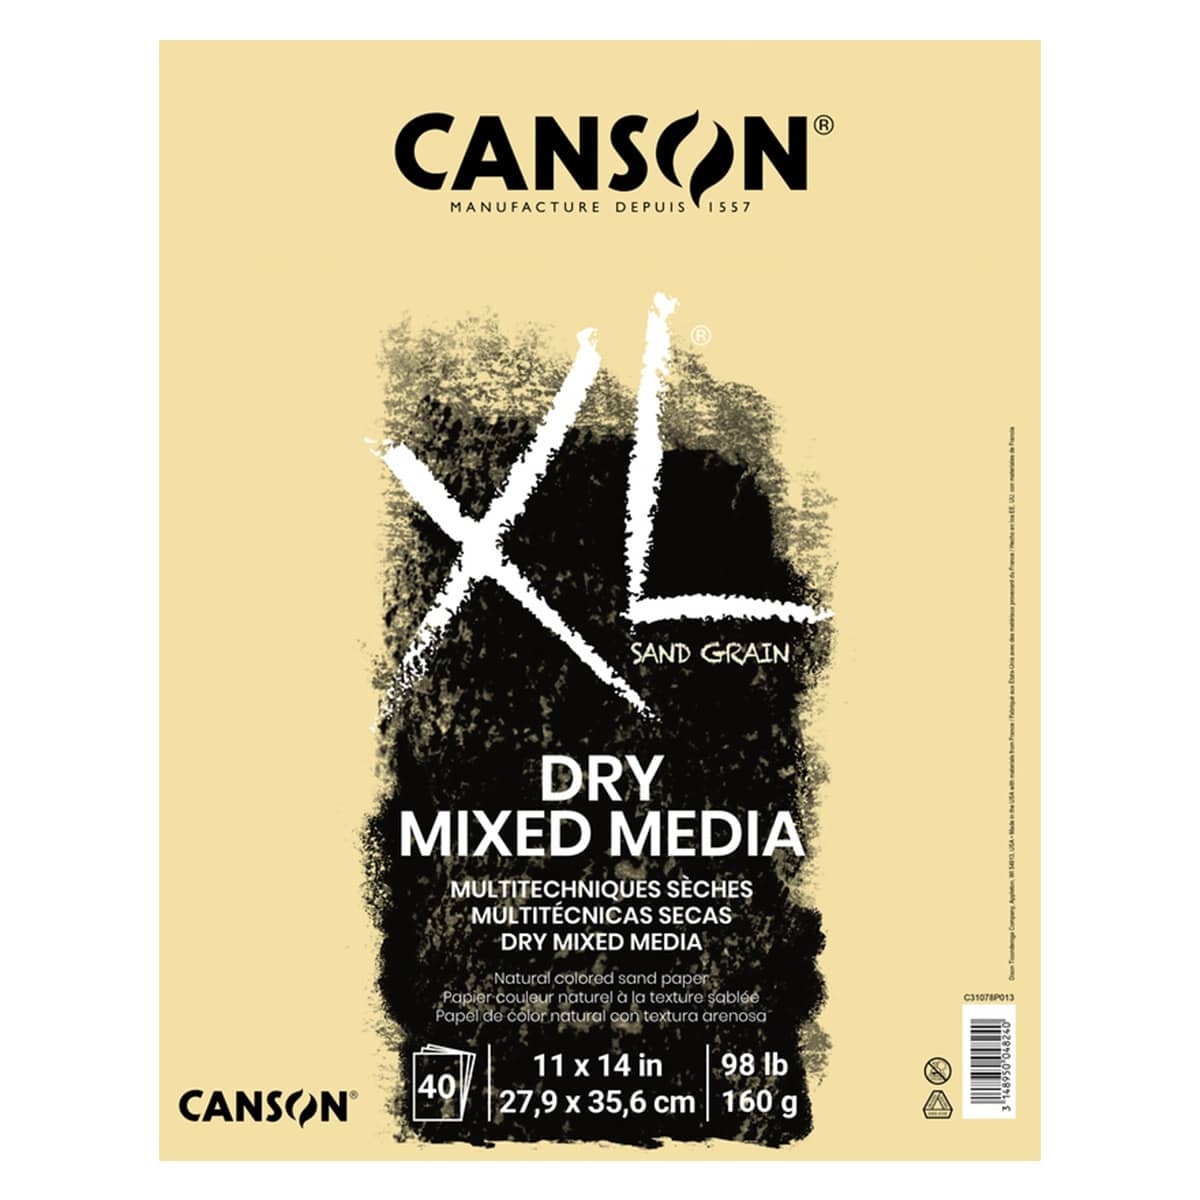 Canson Mix Media Art Books and Pads